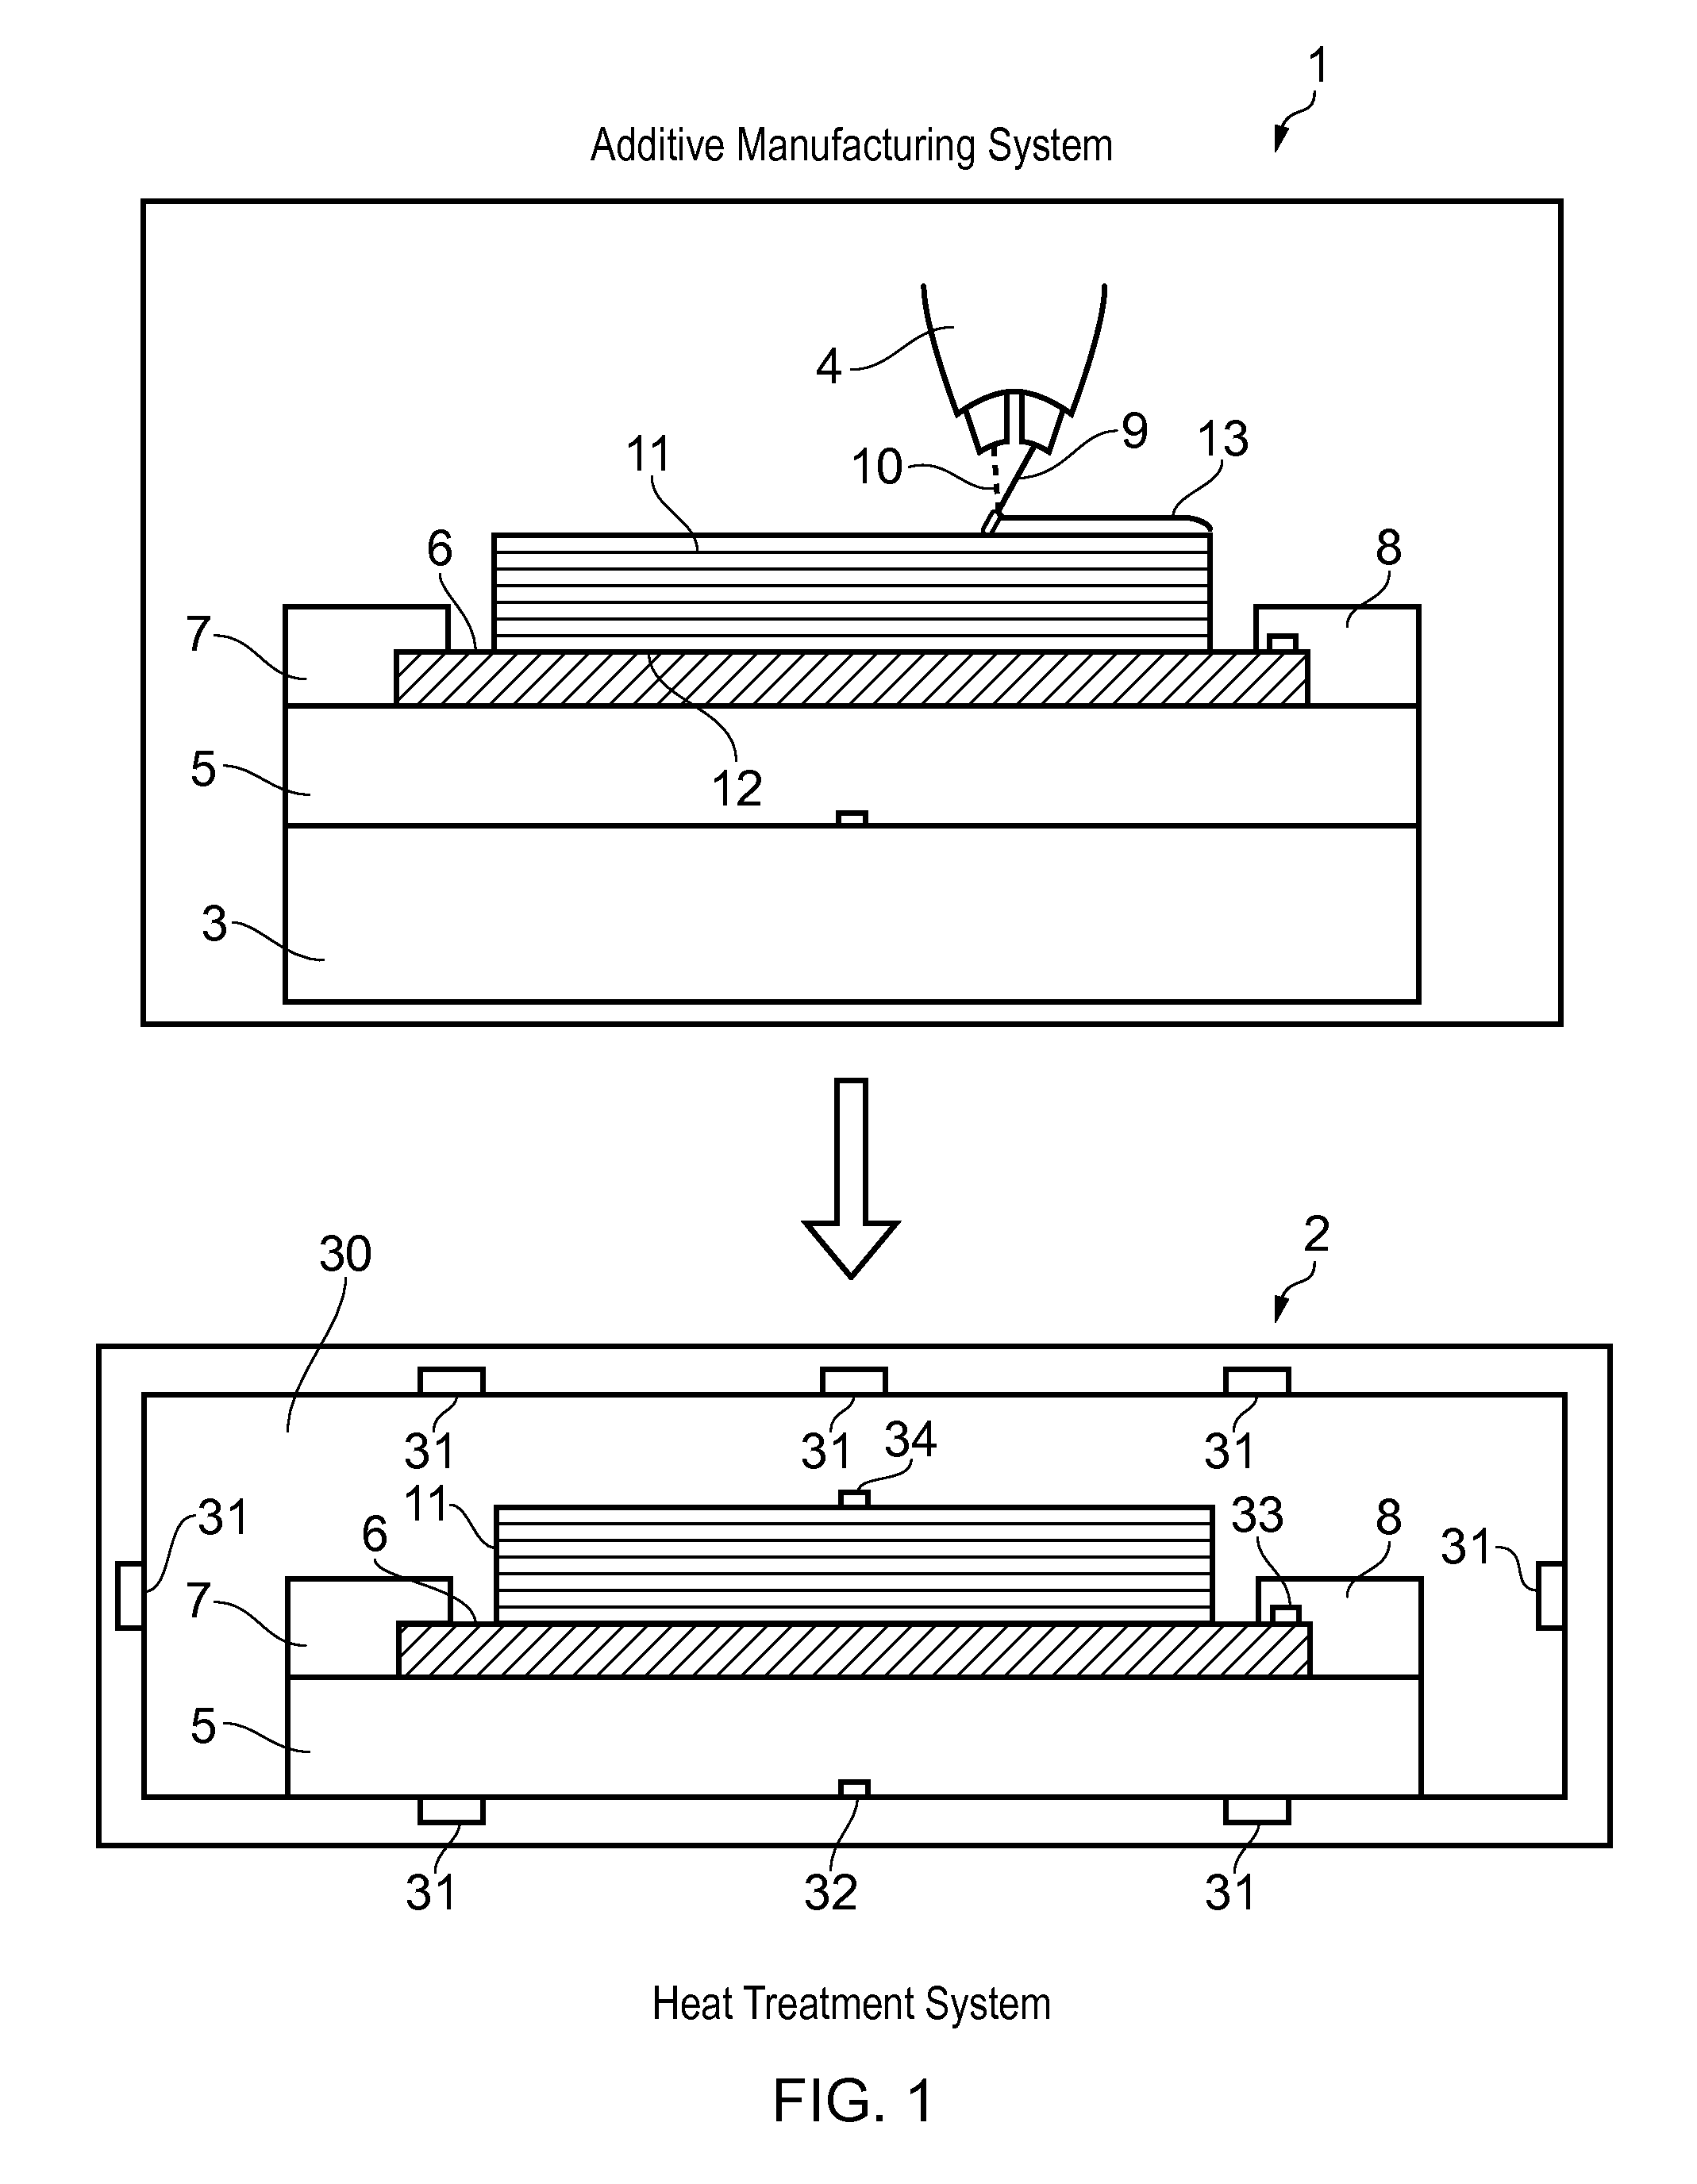 Method of Additive Manufacturing and Heat Treatment